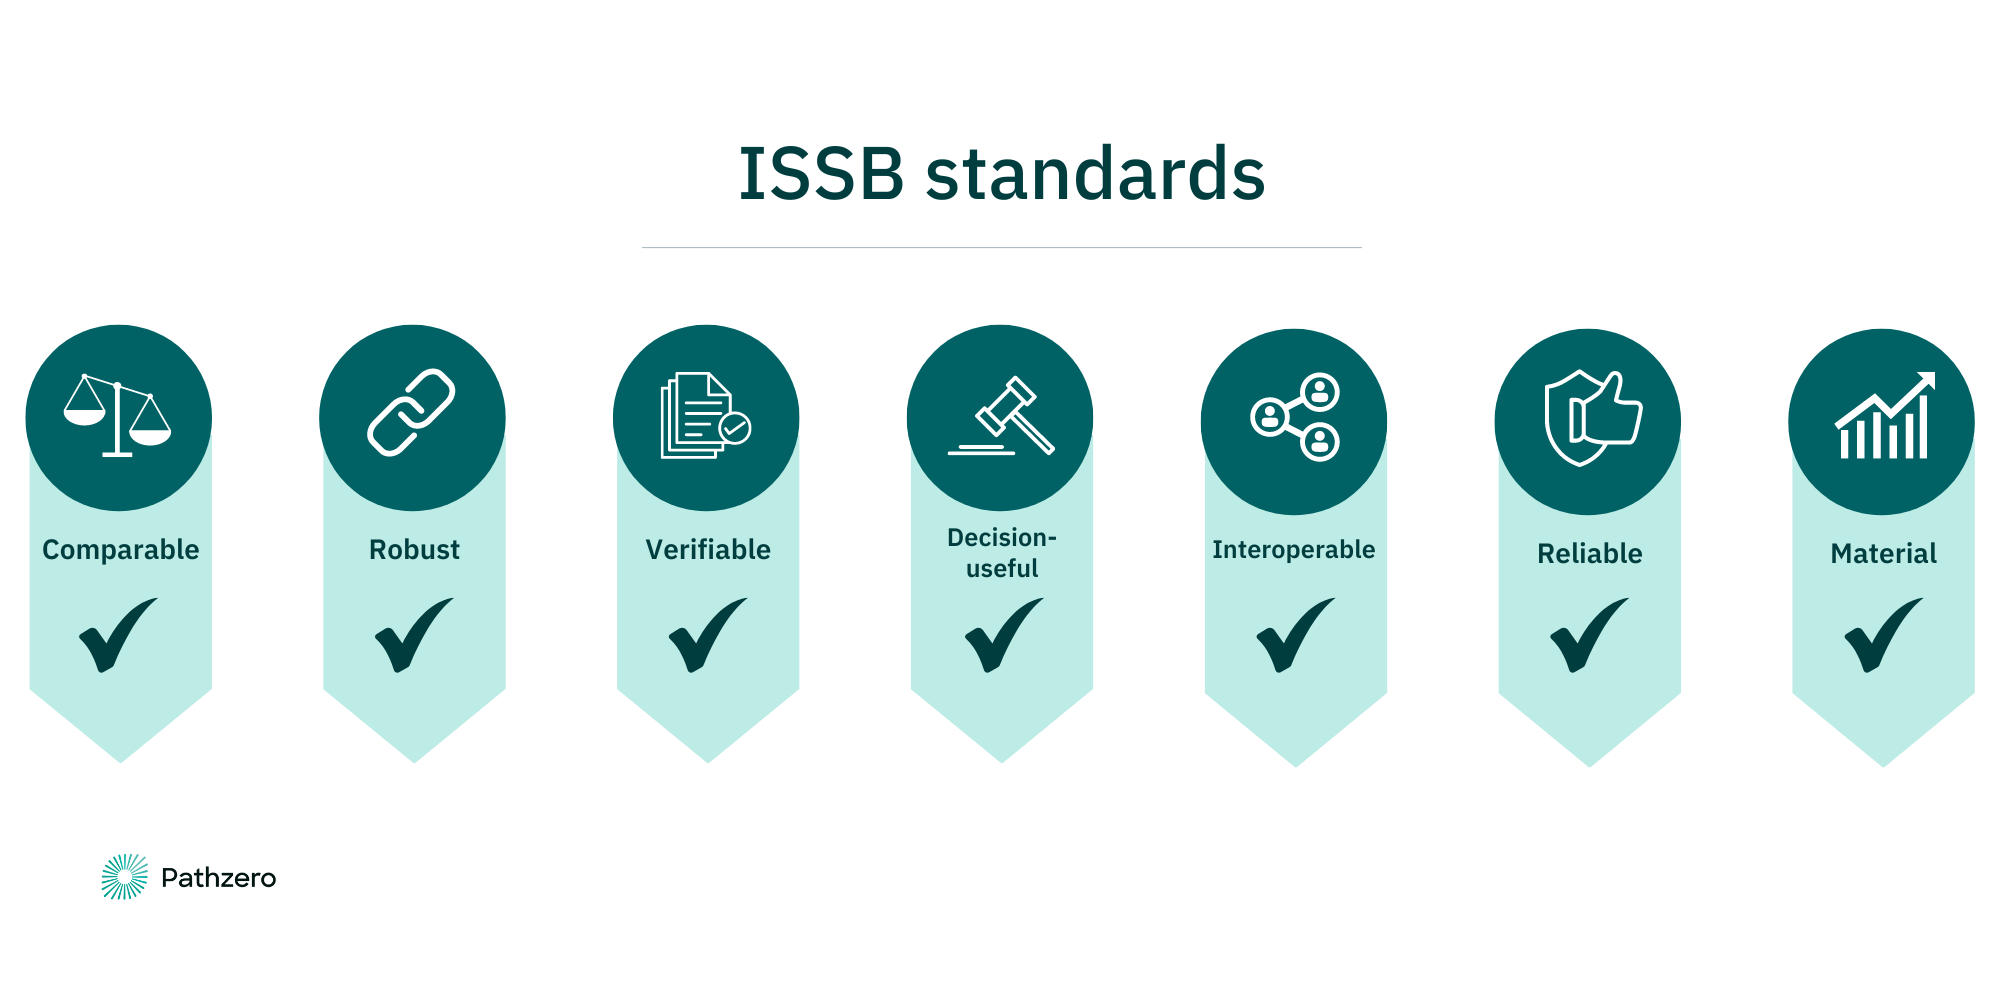 Diagram: ISSB standards are comparable, robust, verifiable, decision-useful, interoperable, reliable, and material.